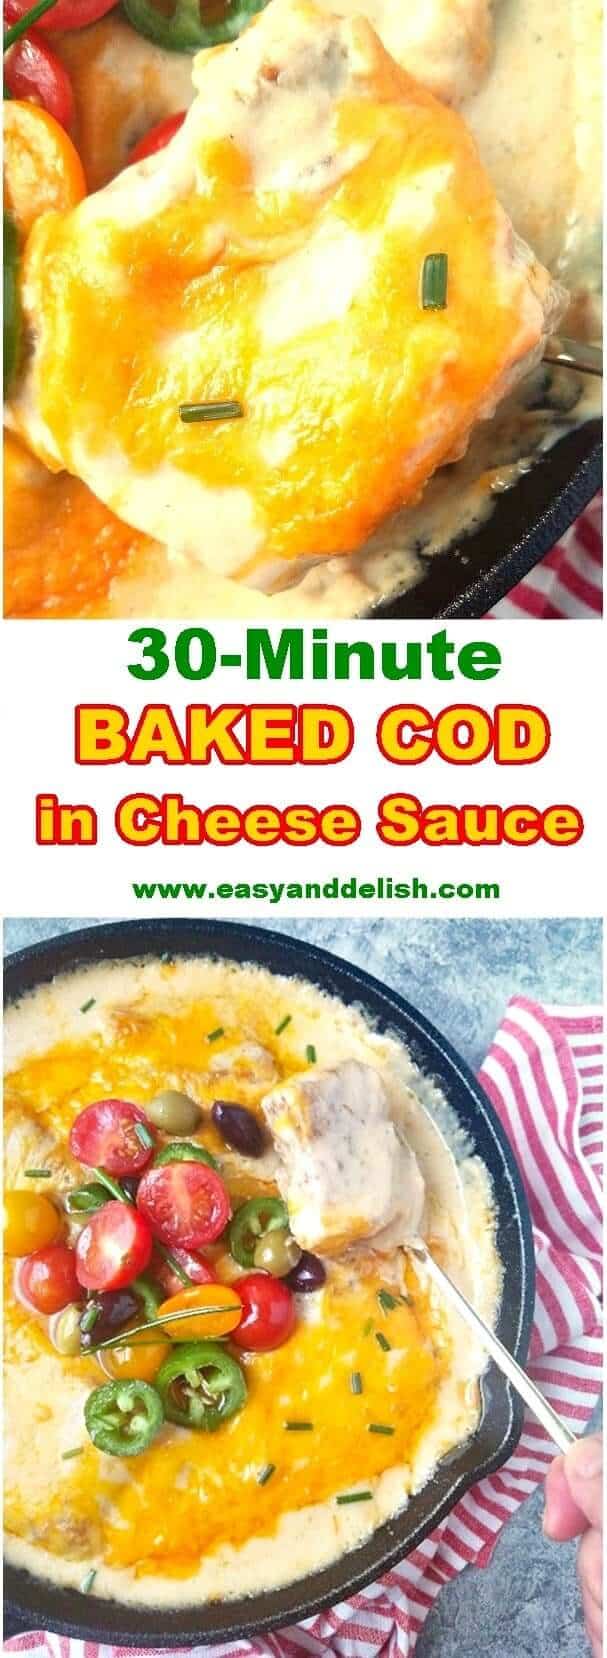 Two close up images showing baked cod in cheese sauce being served.